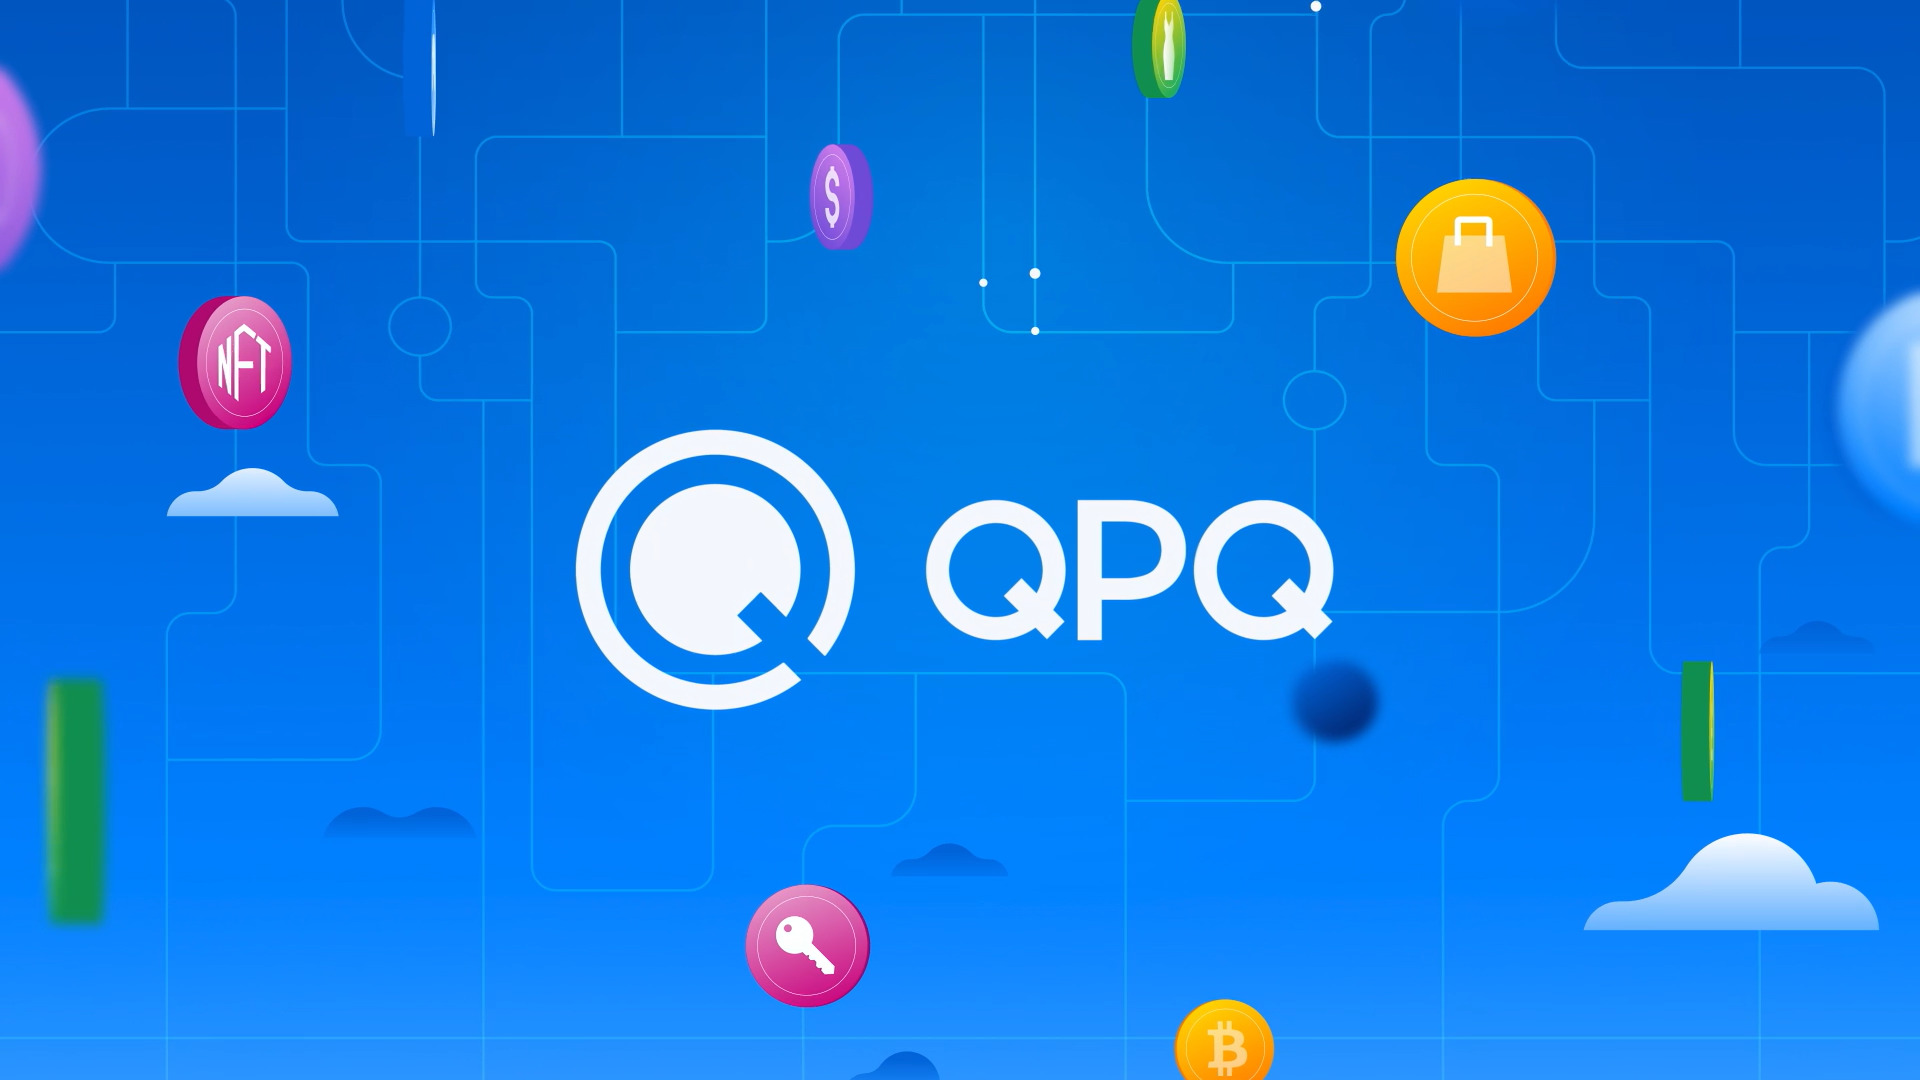 Deep tech company QPQ launches new protocol for Distributed Ledger Technology